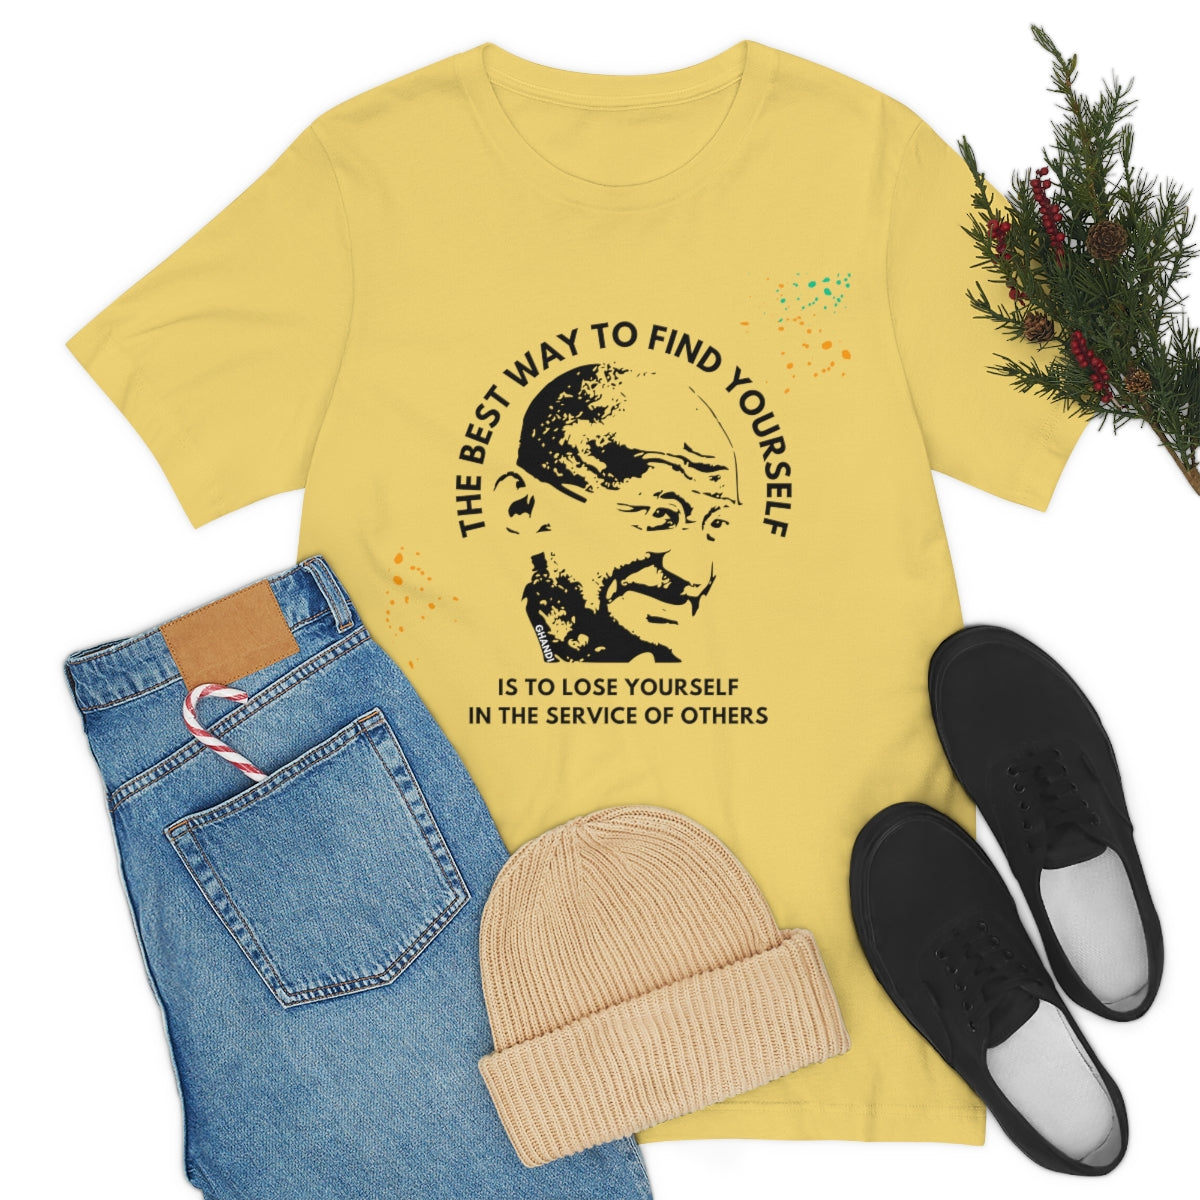 Ghandi T shirts, Best Way To Find Yourself Quote Ghandi Shirts, Statement Tees, Serve Others Shirts